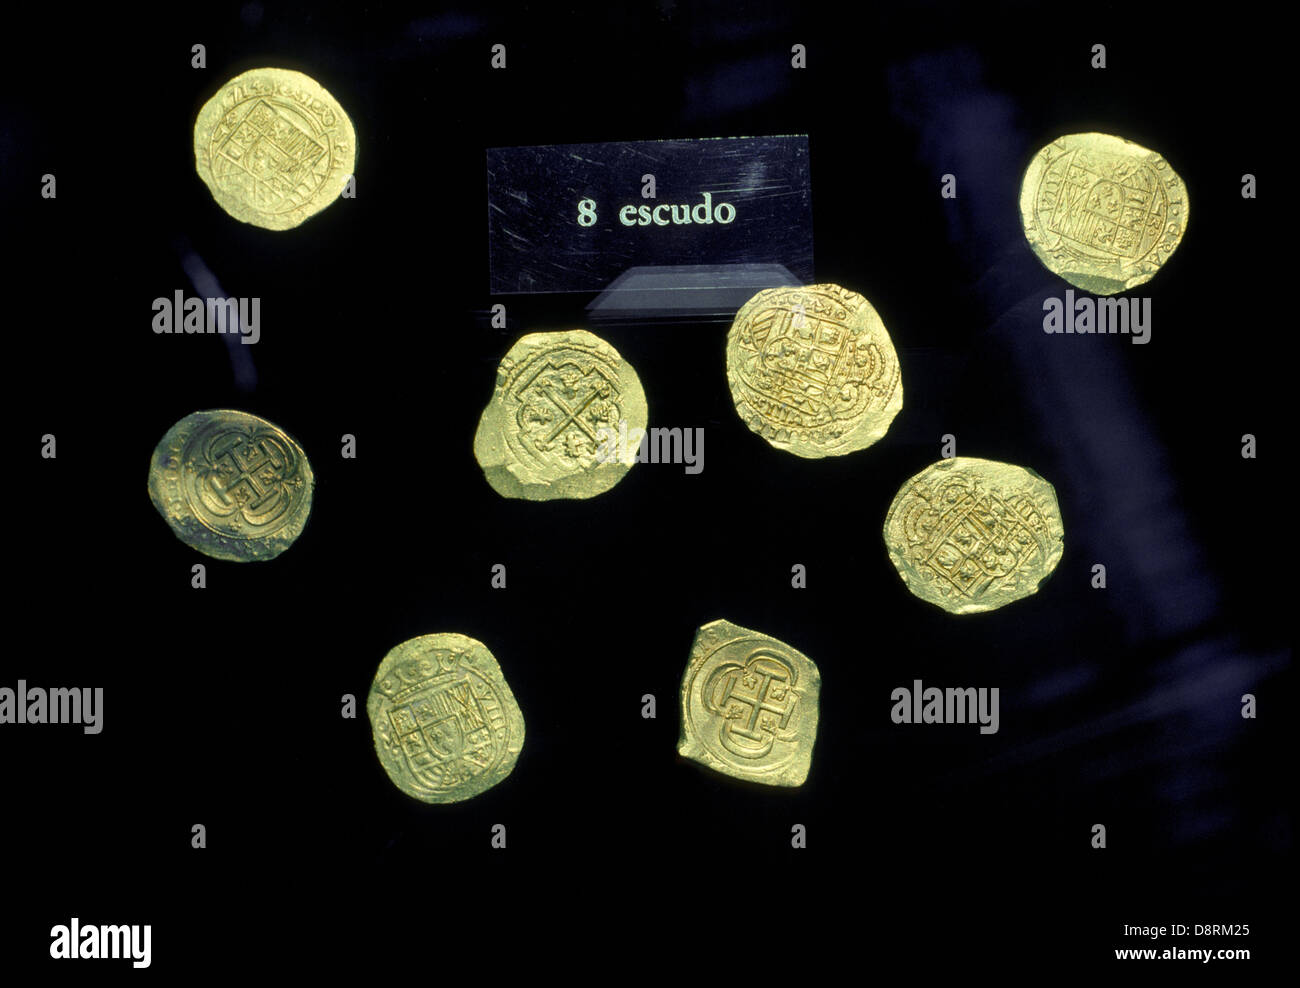 Vintage gold coins recovered from the wreckages of Spanish sailing ships are displayed in the McLarty Treasure Museum at Vero Beach, Florida, USA. Stock Photo